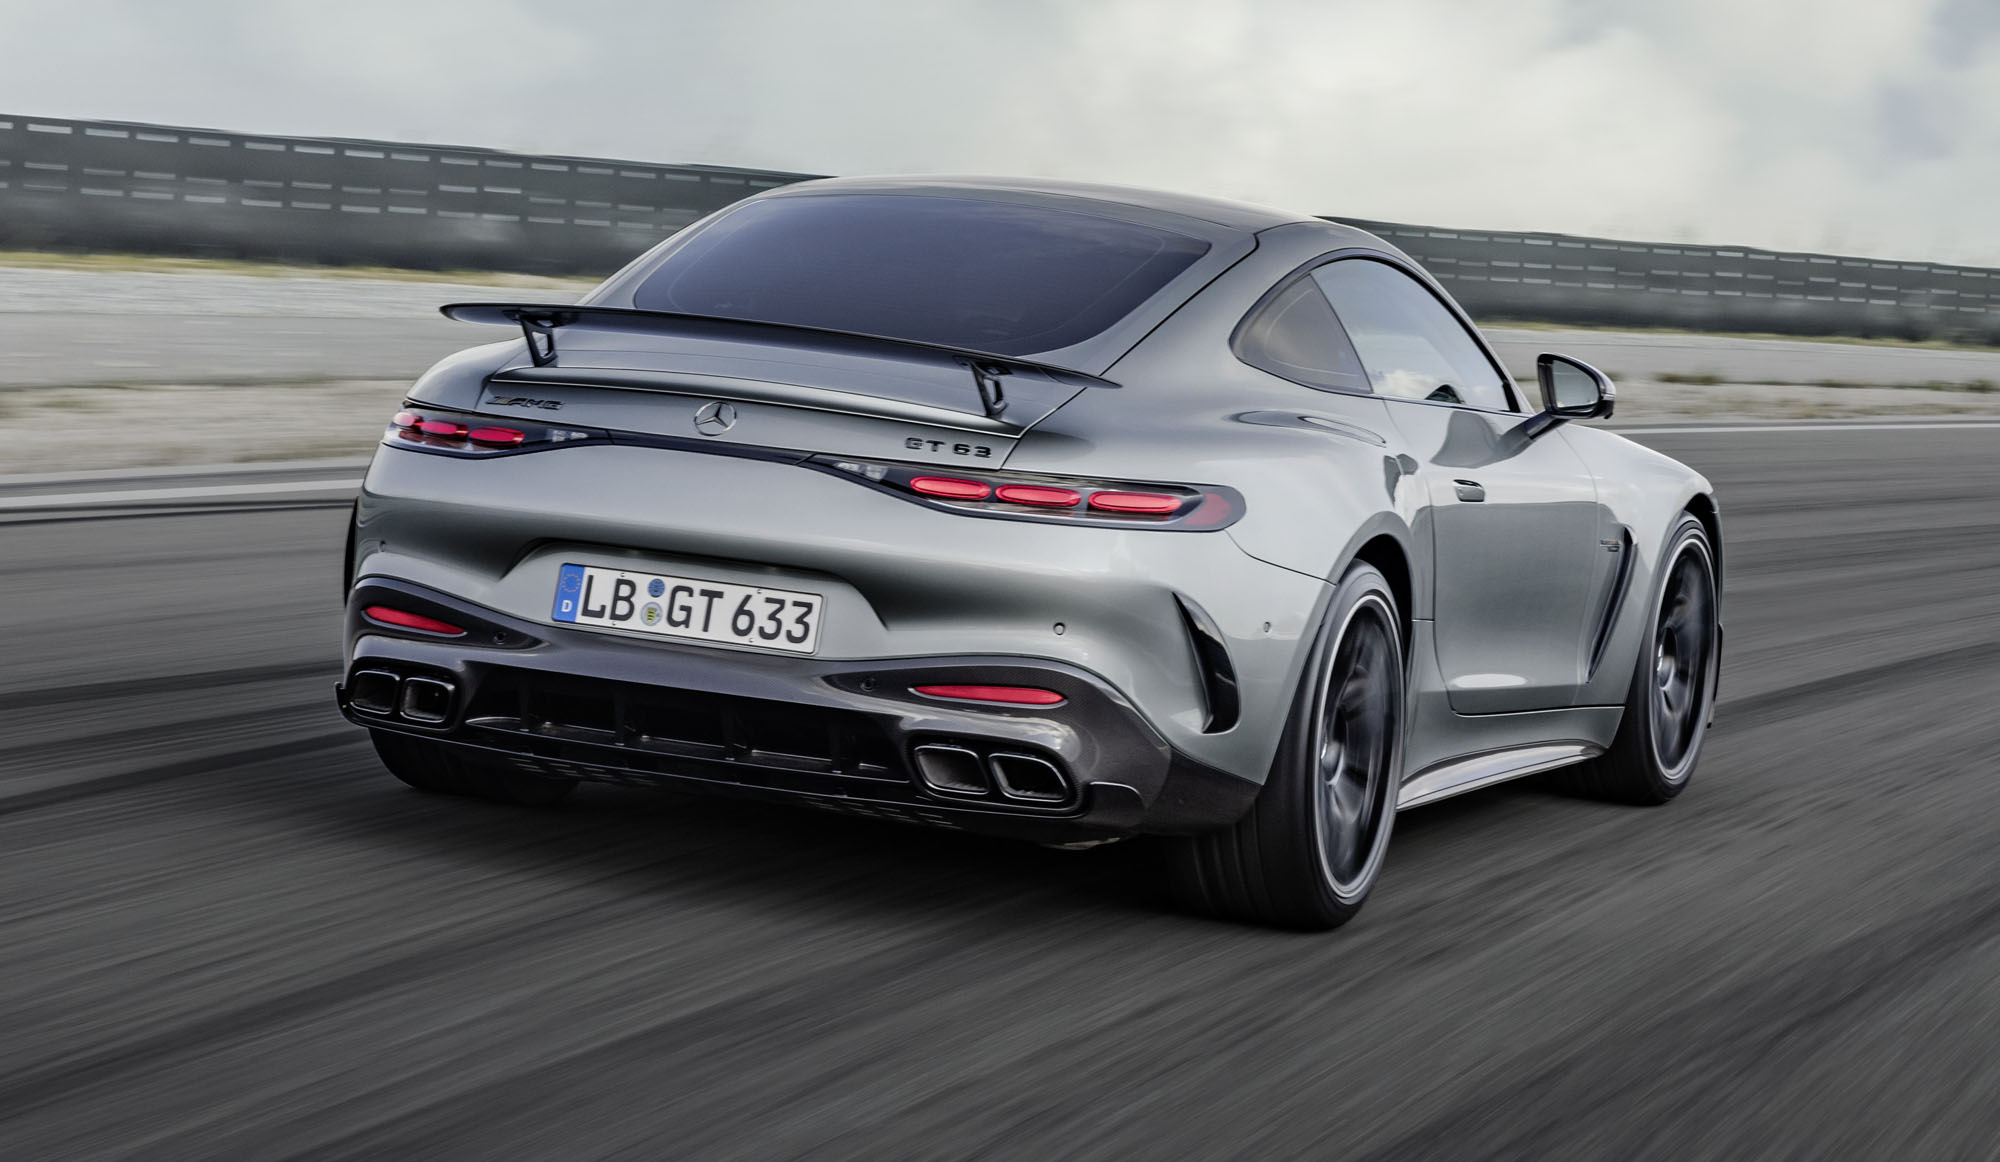 mercedes-amg, mercedes-amg gt, mercedes-benz, next-generation mercedes-amg gt revealed – the v8 is alive and well